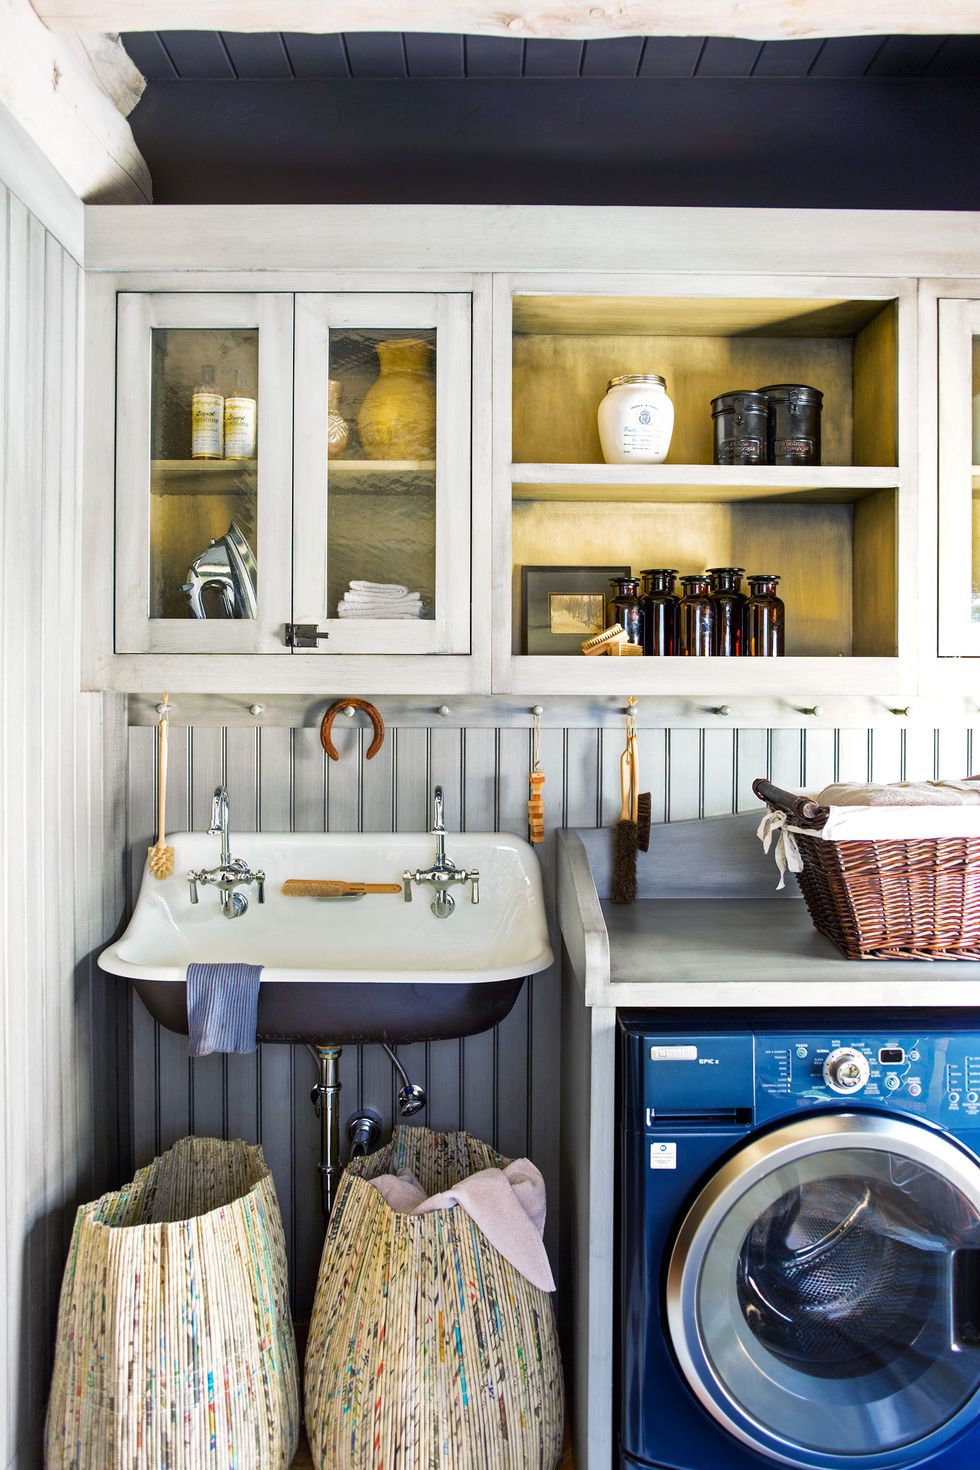 13 Mudroom Laundry Room Ideas That Pull Double Duty